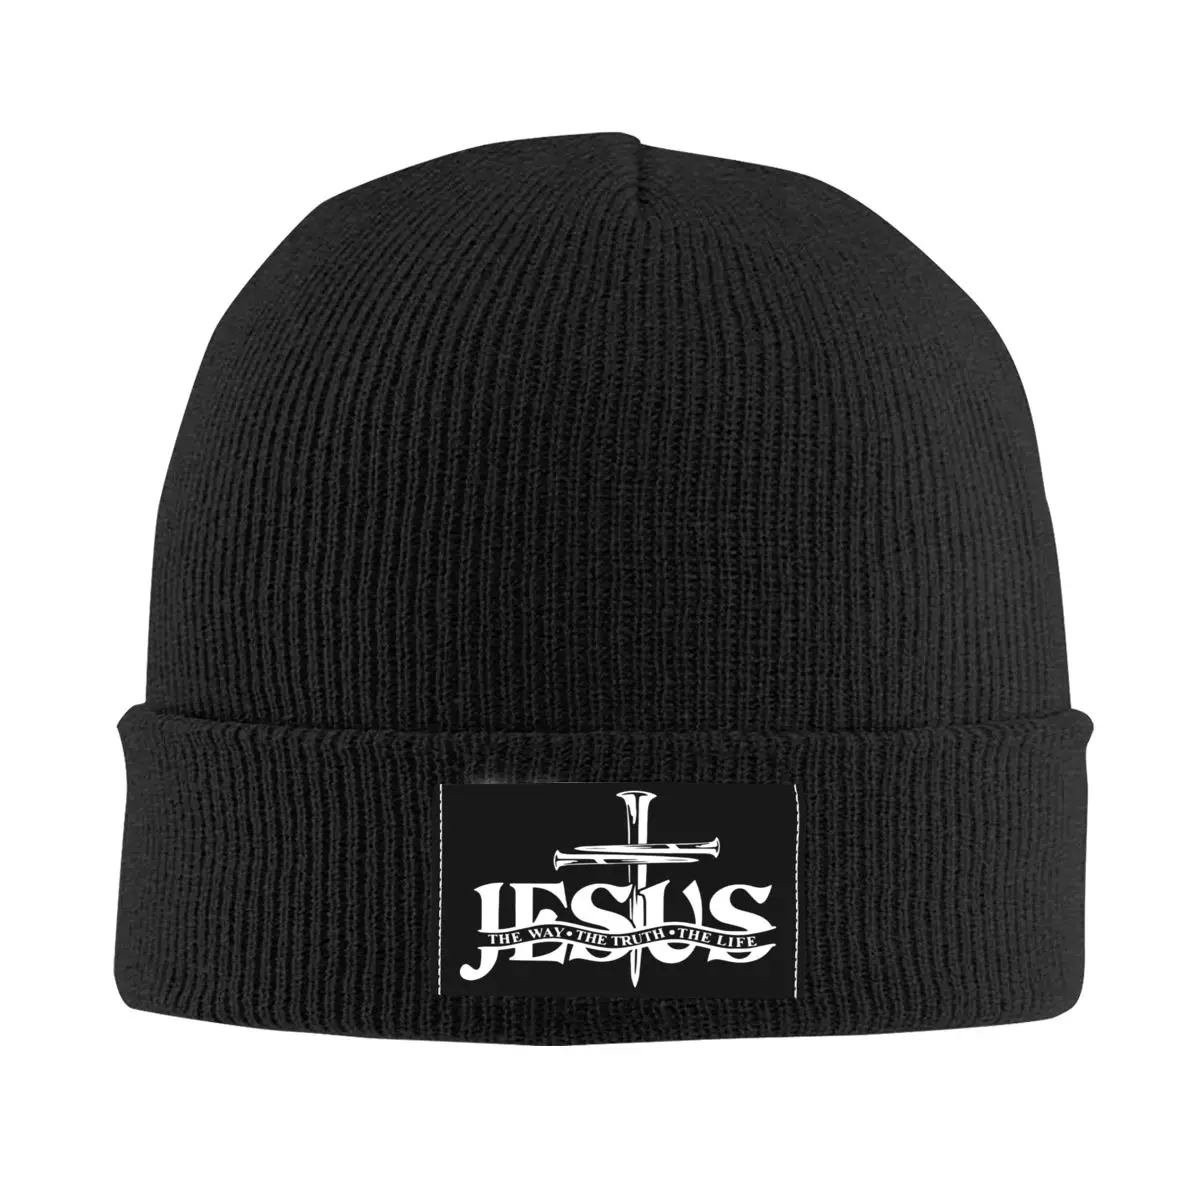 

Jesus The Way The Truth The Life Skullies Beanies Caps Winter Warm Knitted Hat Adult Christ Catholic Bonnet Hats Outdoor Ski Cap